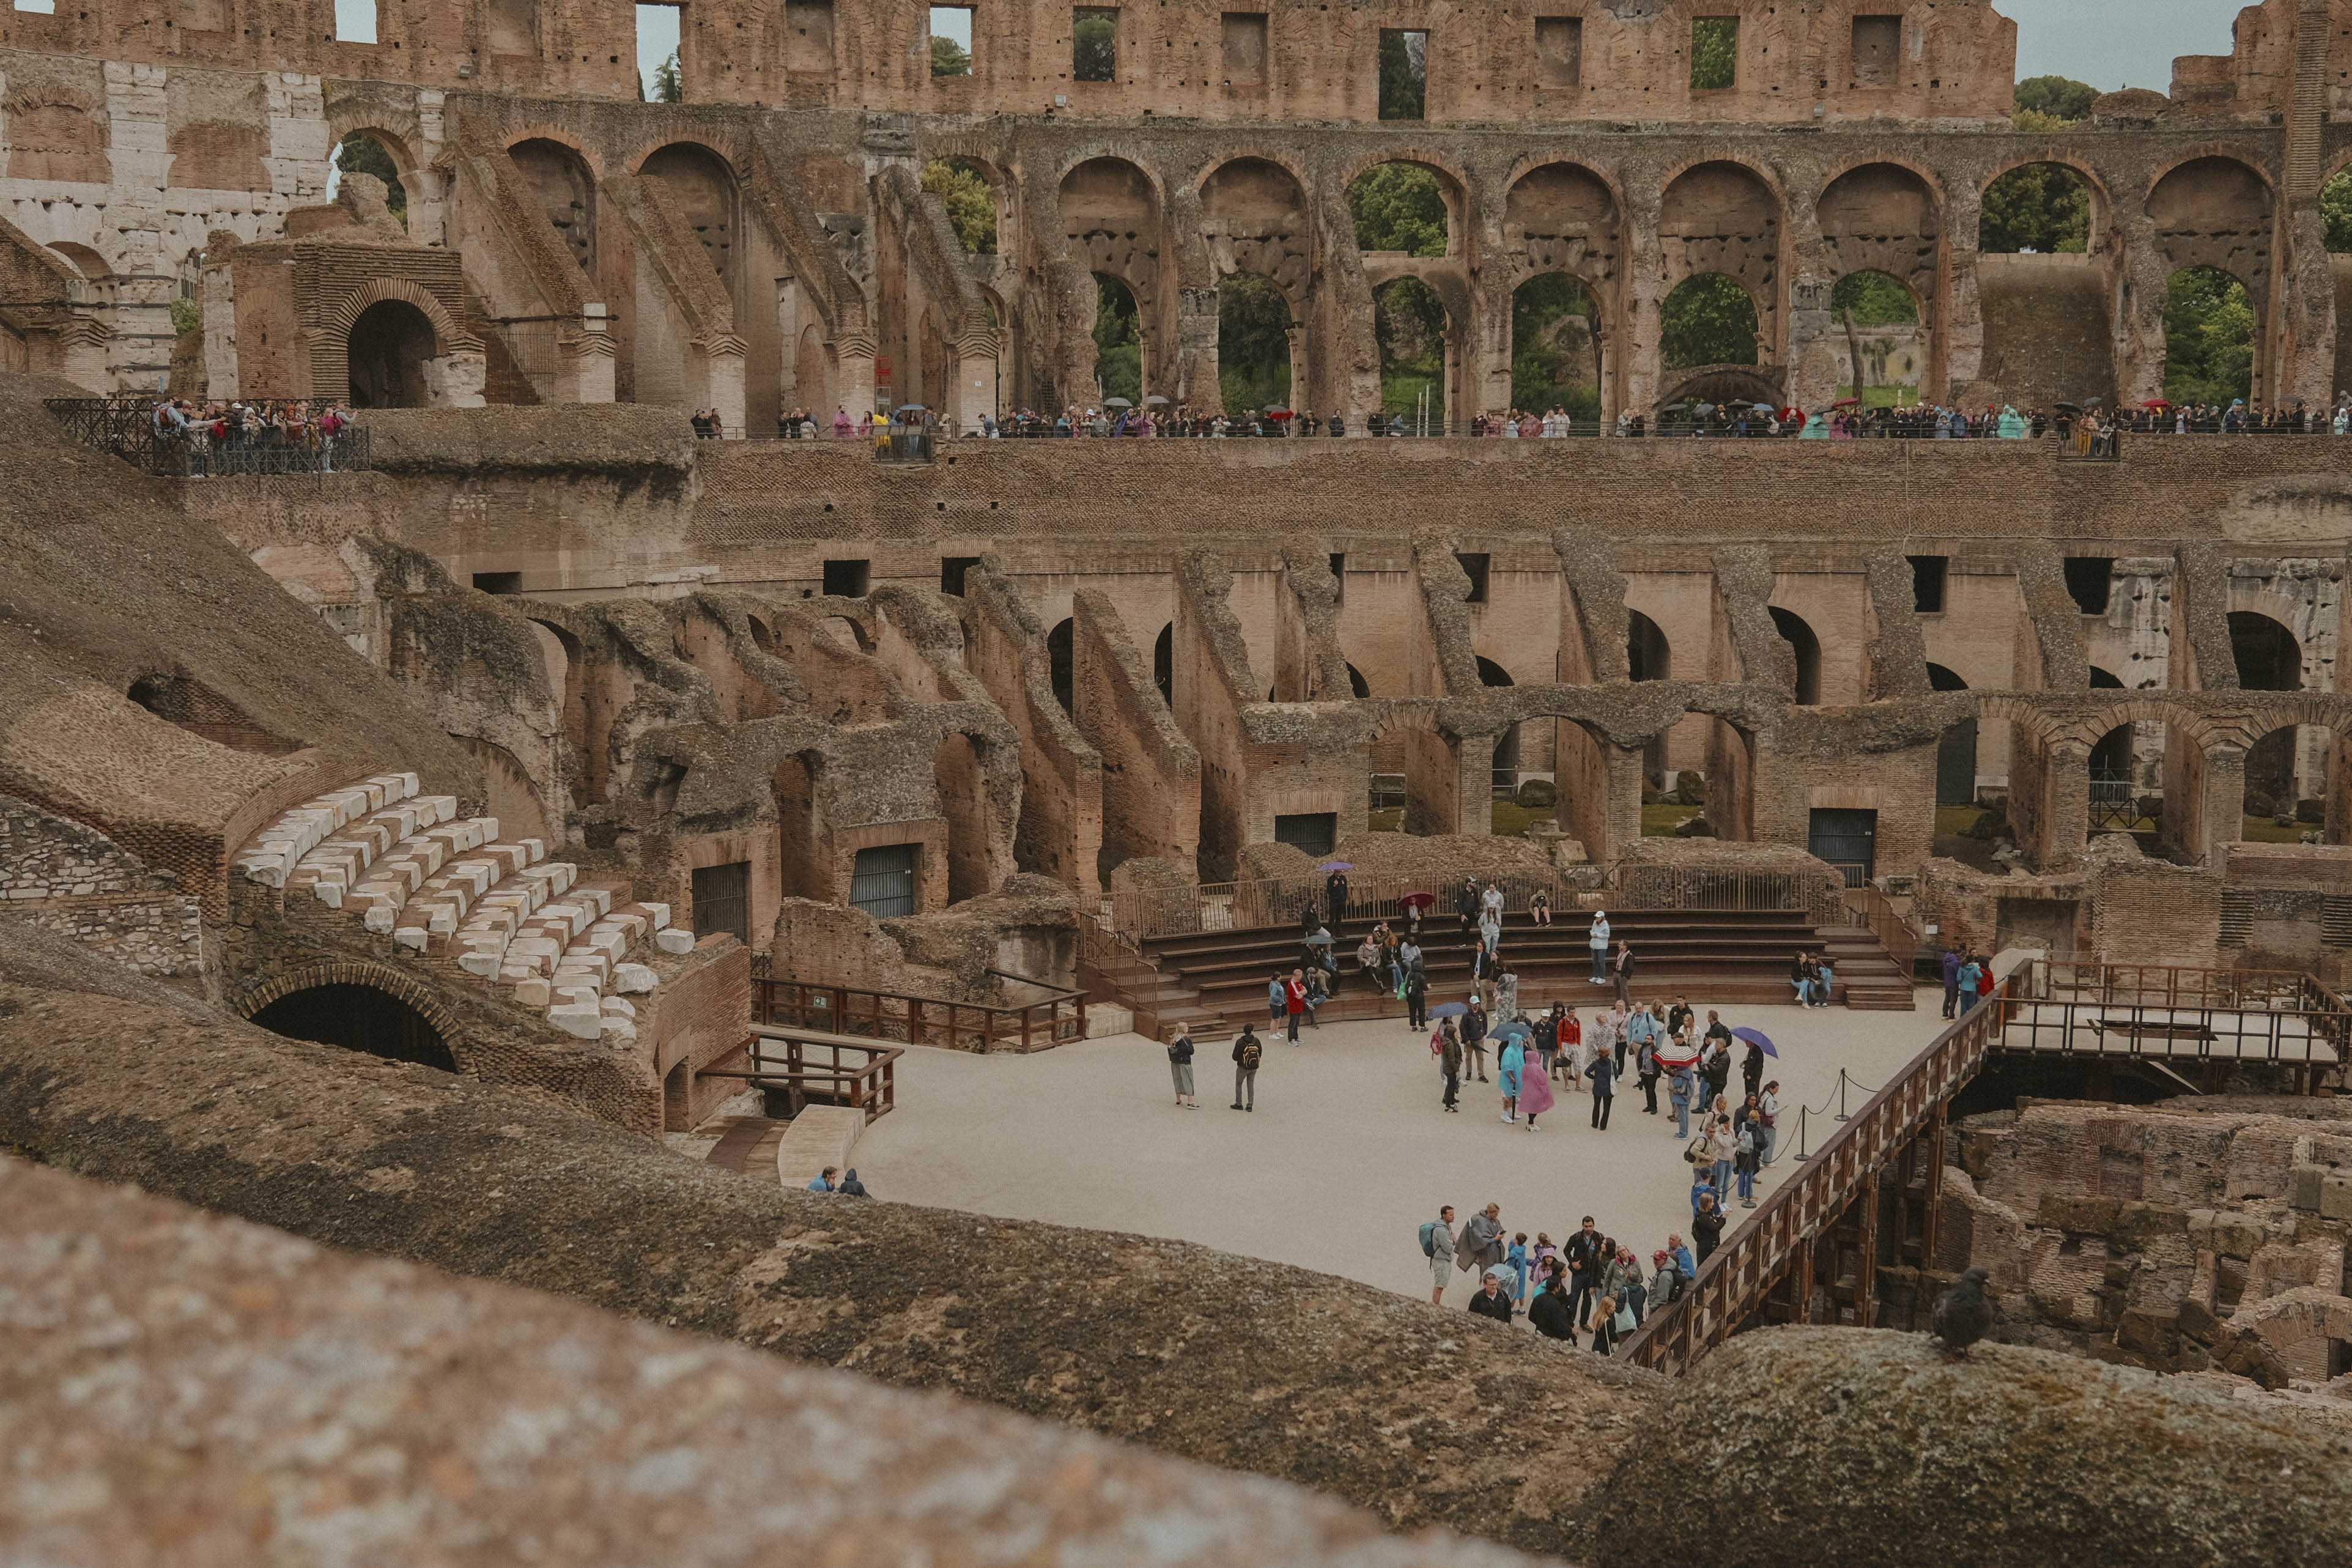 The Colosseum floor from above